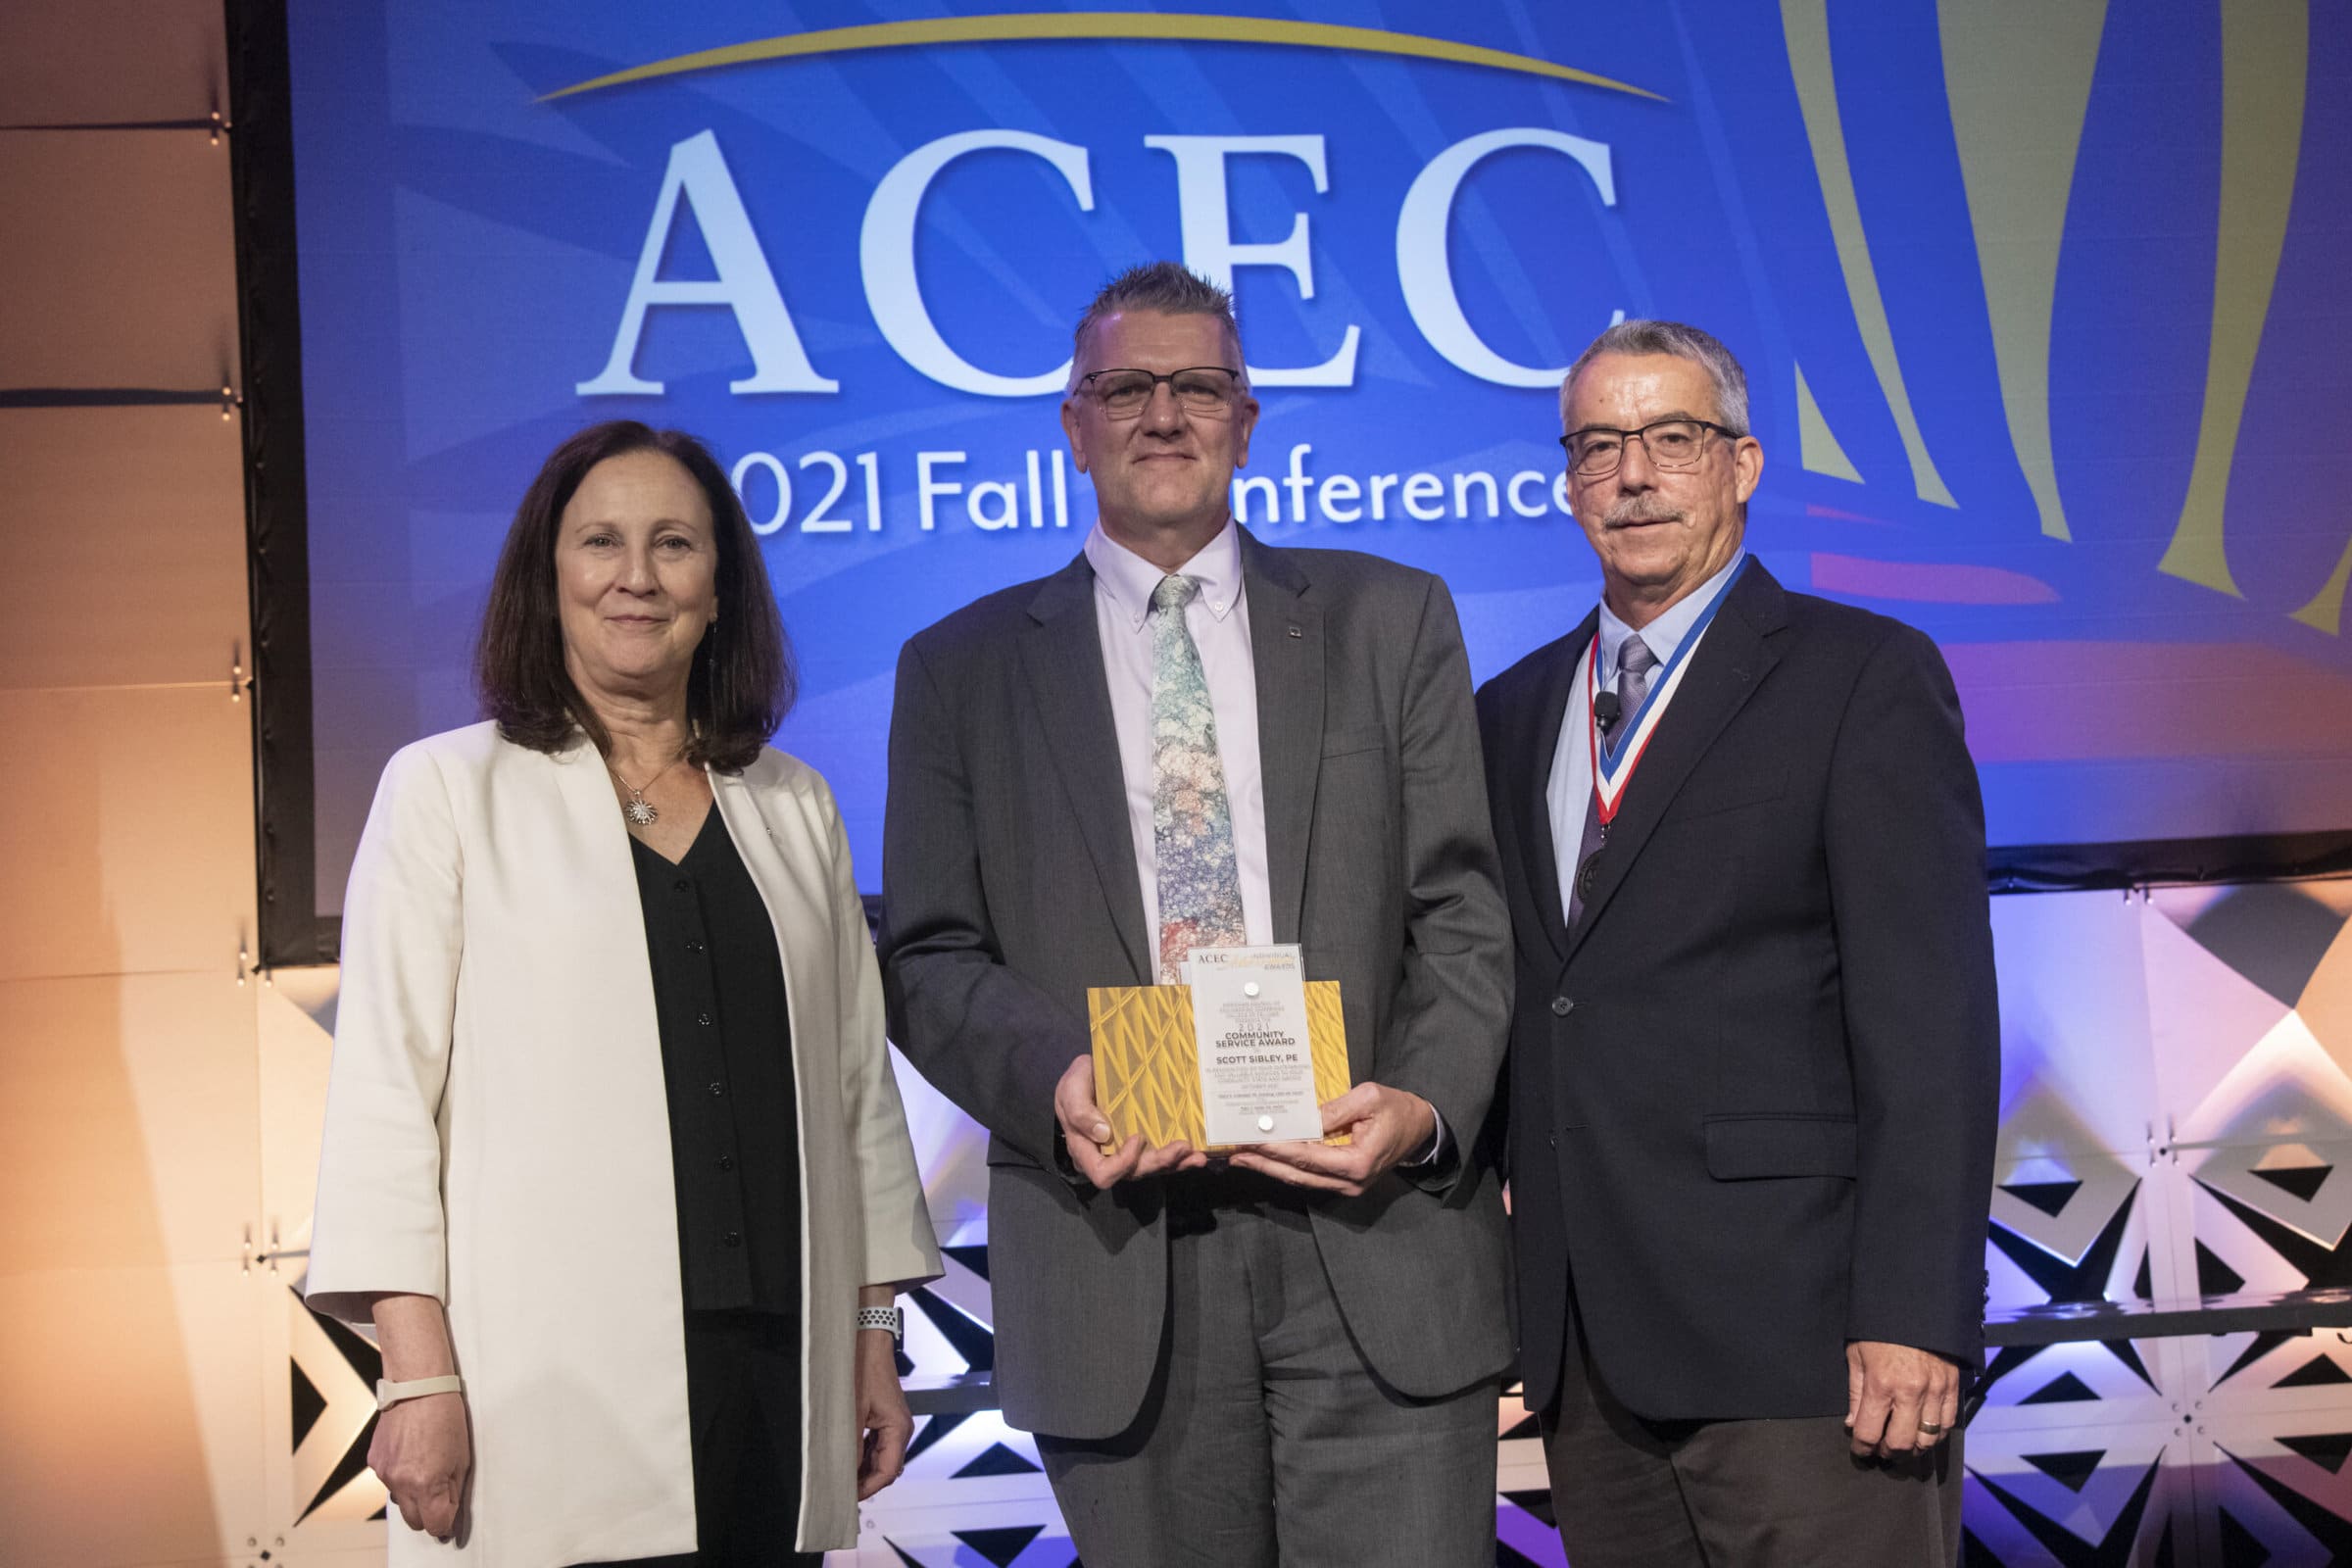 acec members and directors during ACEC 2021 fall conference